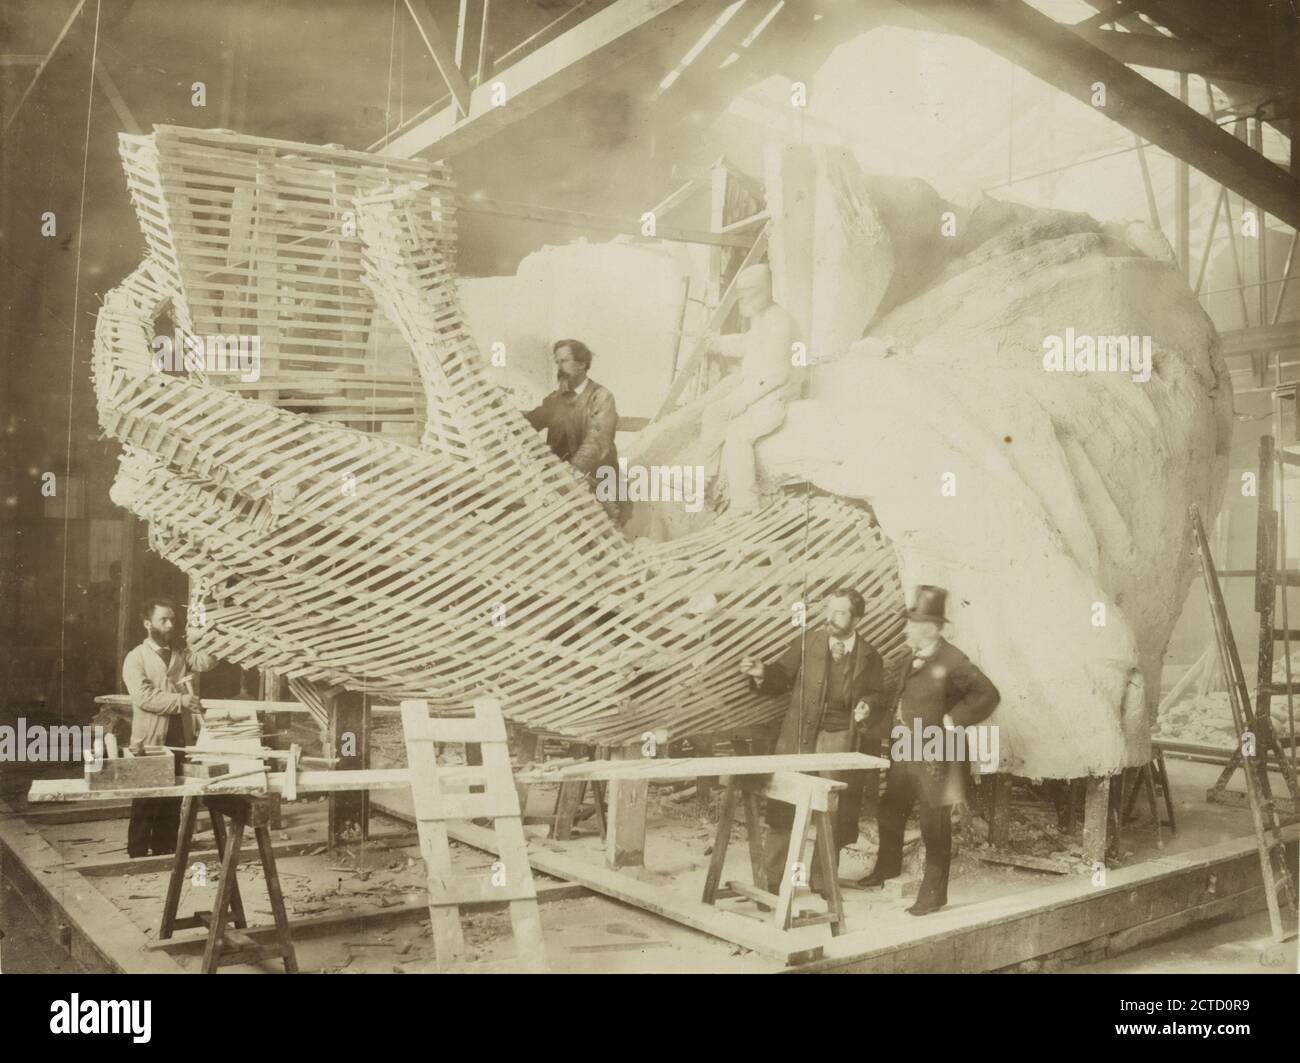 Construction of the skeleton and plaster surface of the left arm and hand of the Statue of Liberty., still image, Photographs, 1883, Fernique, Albert, 1841-1898 Stock Photo